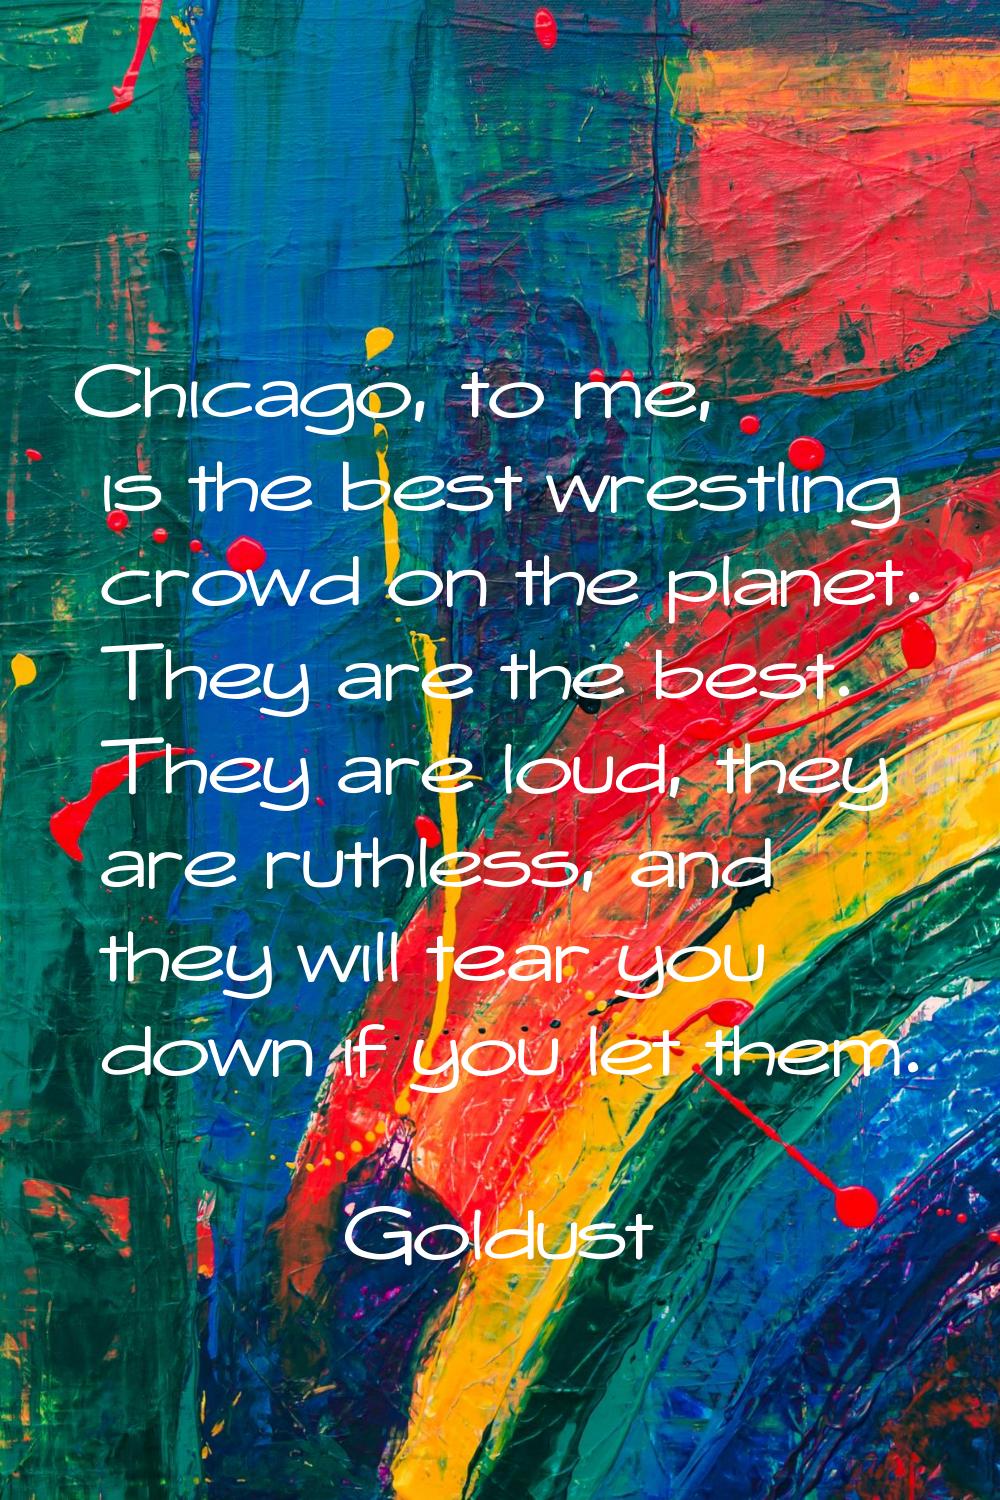 Chicago, to me, is the best wrestling crowd on the planet. They are the best. They are loud, they a